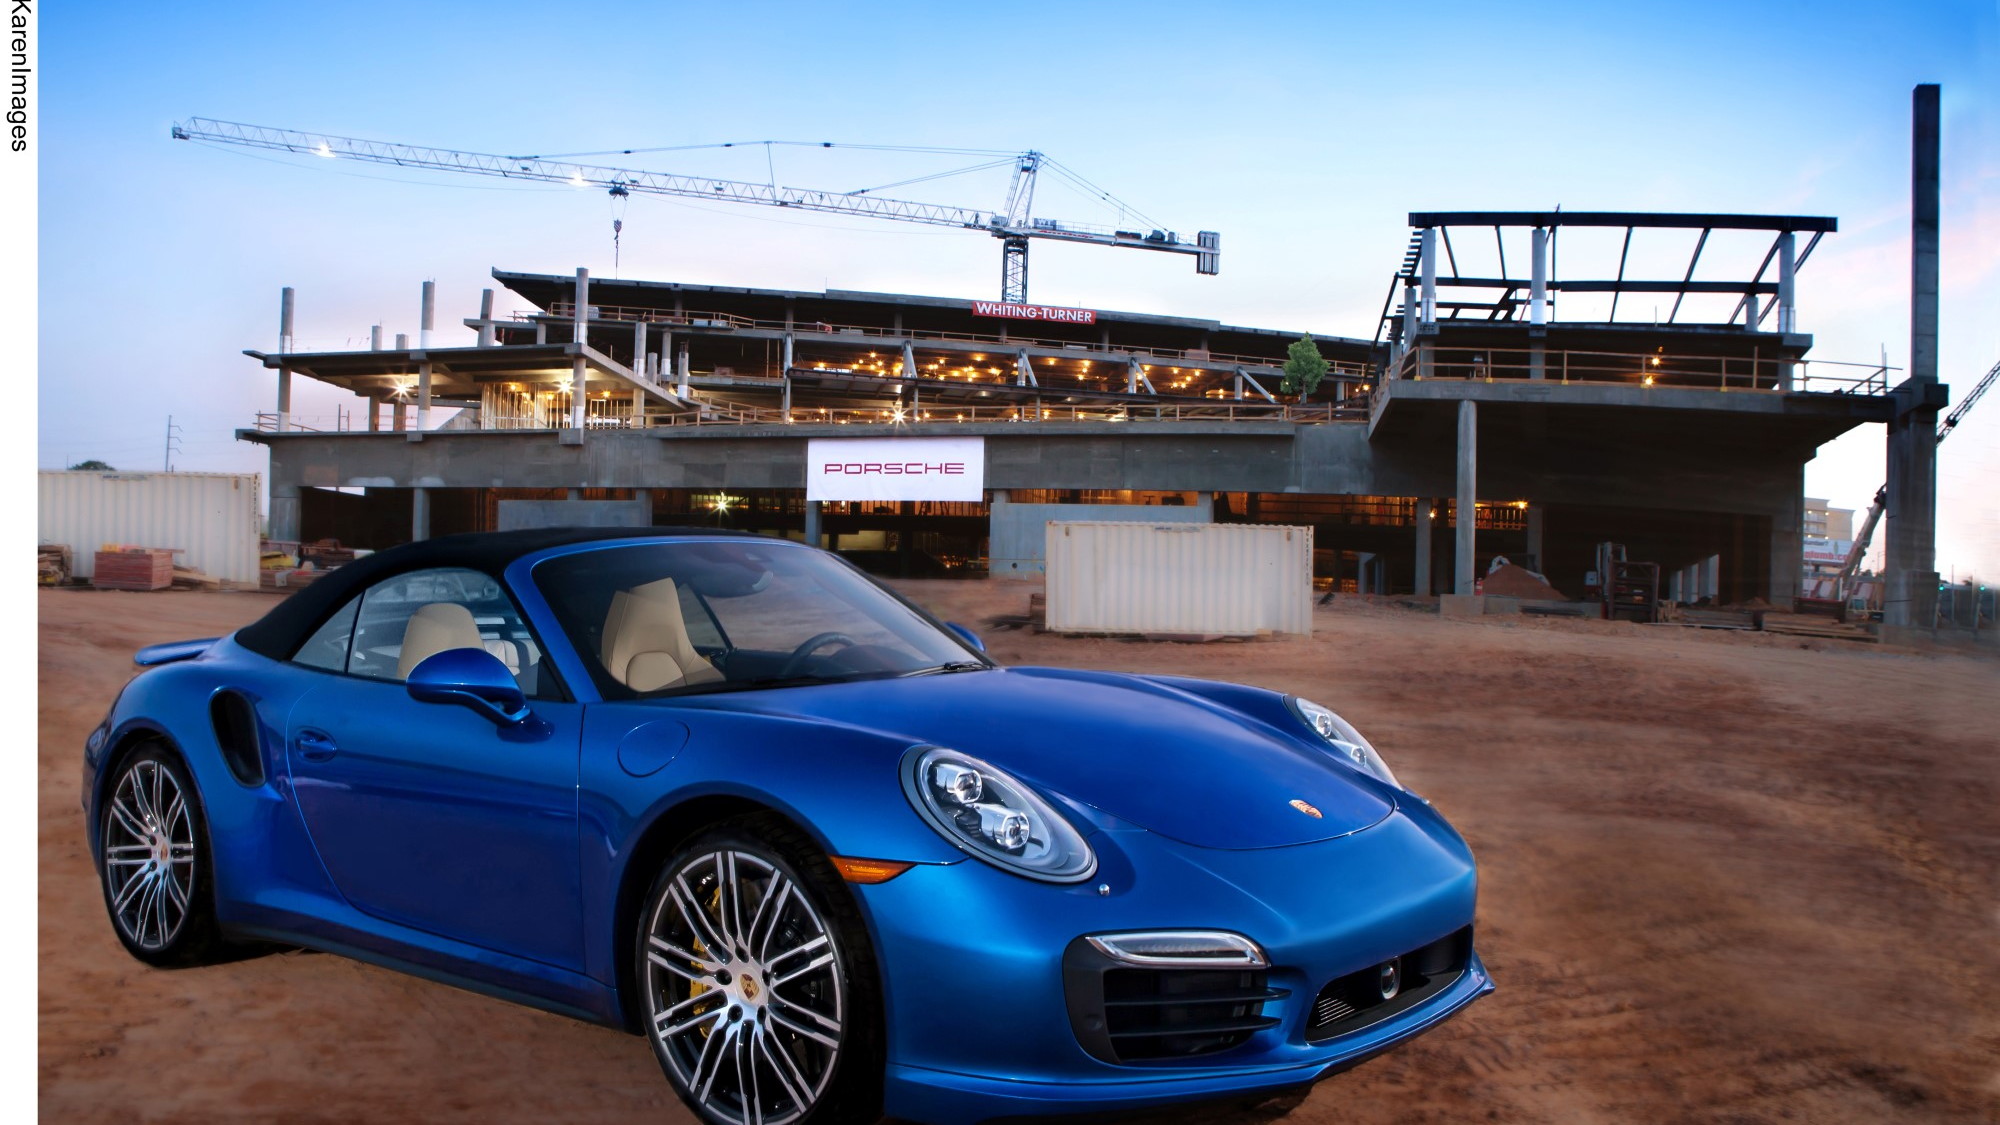 Porsche U.S. headquarters, expected completion by end of 2014